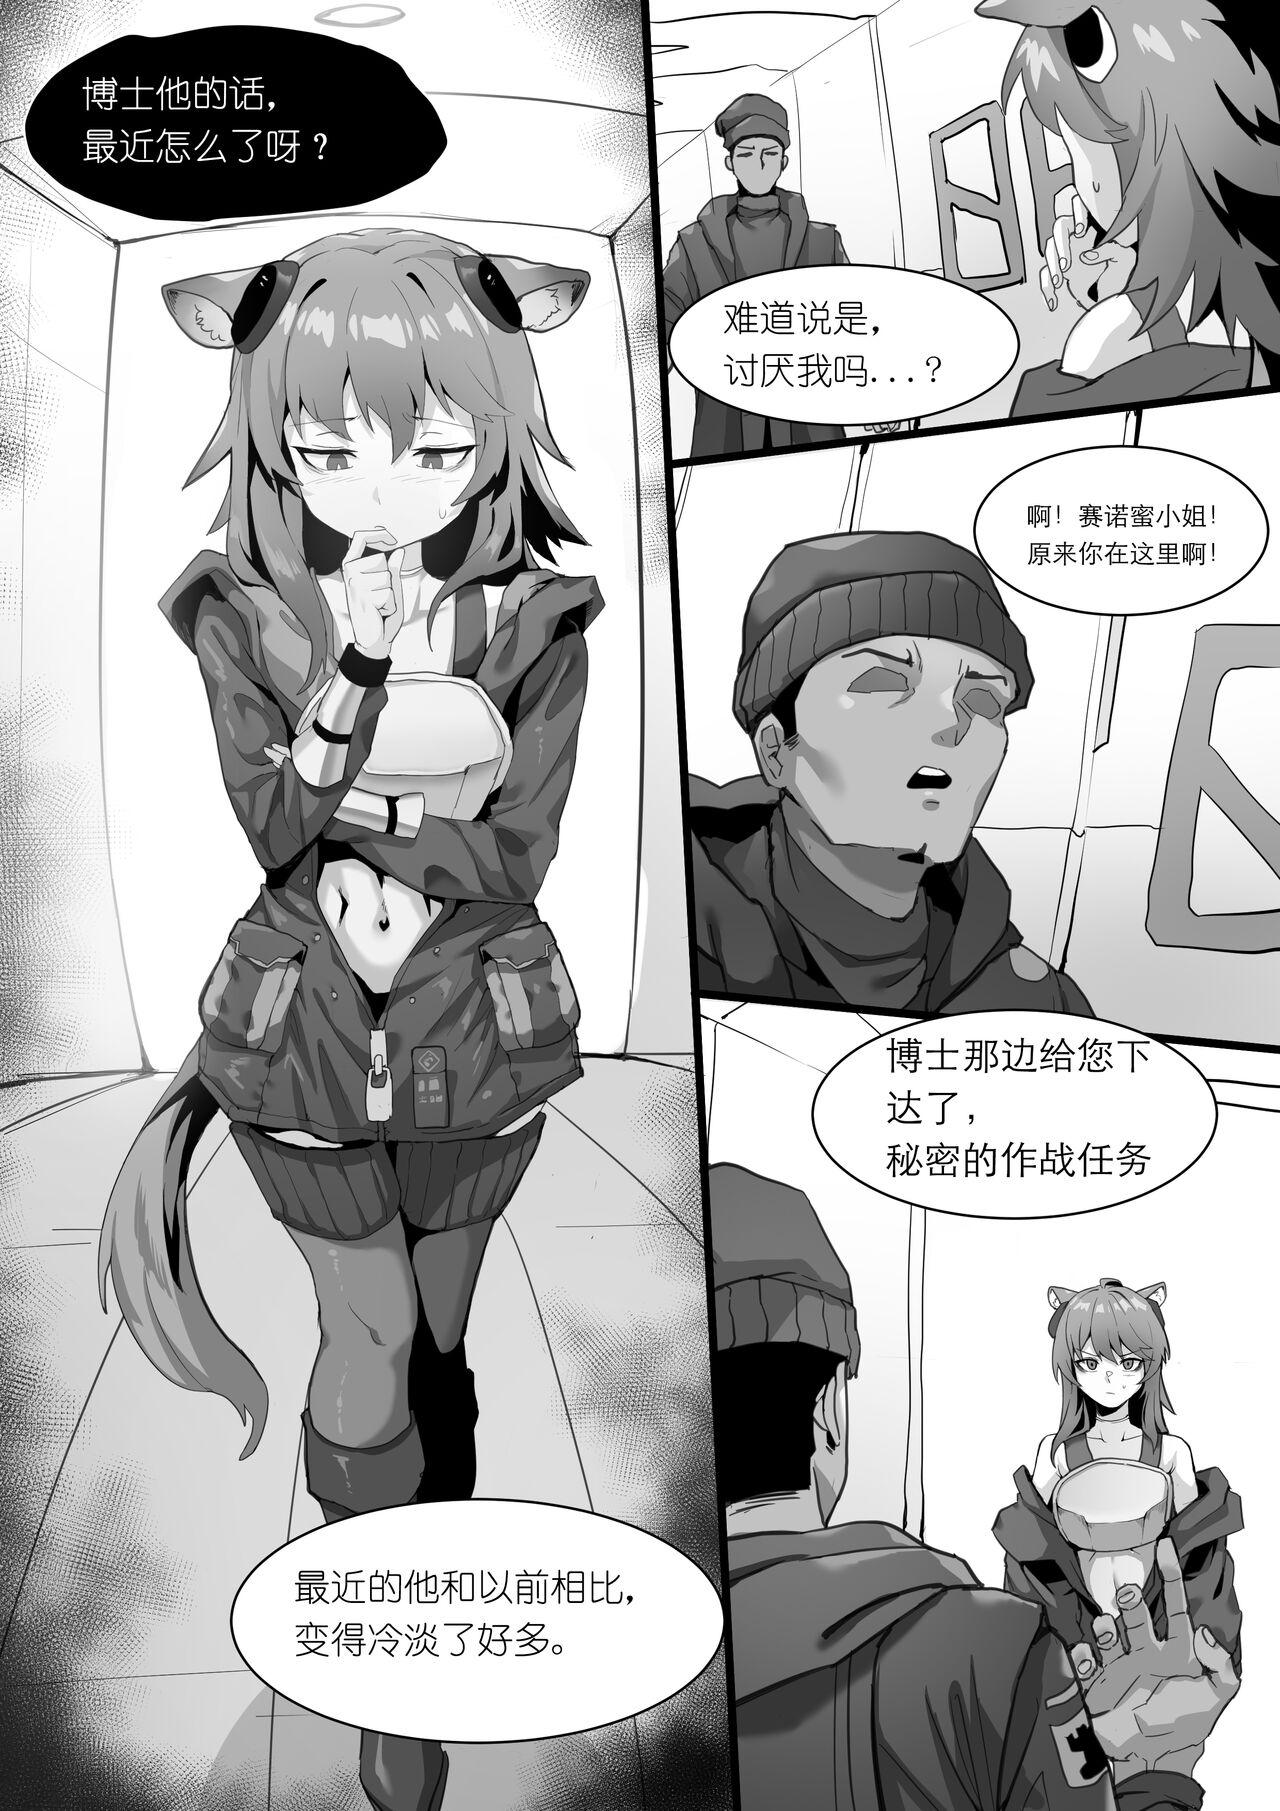 Blowing 欲望方舟记录3 - Arknights Blows - Page 6